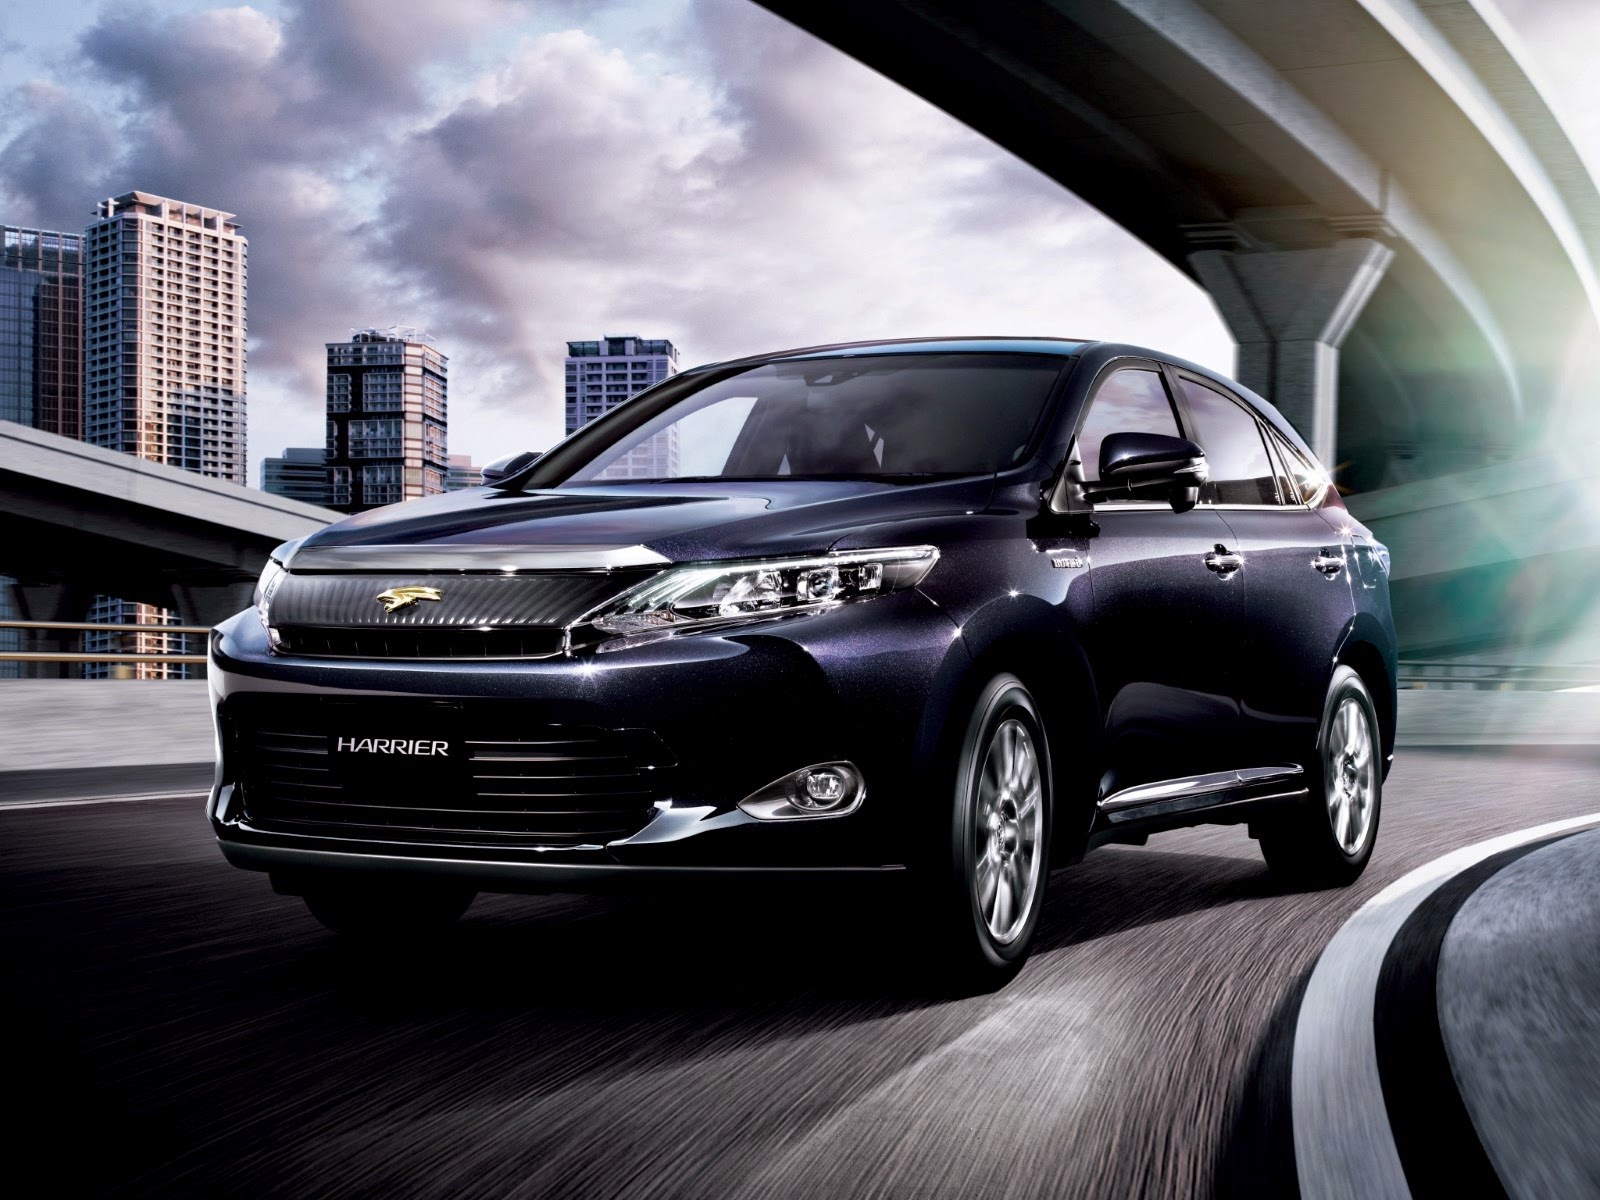 91 All New Toyota Harrier Advanced Luxurious And Beautifully